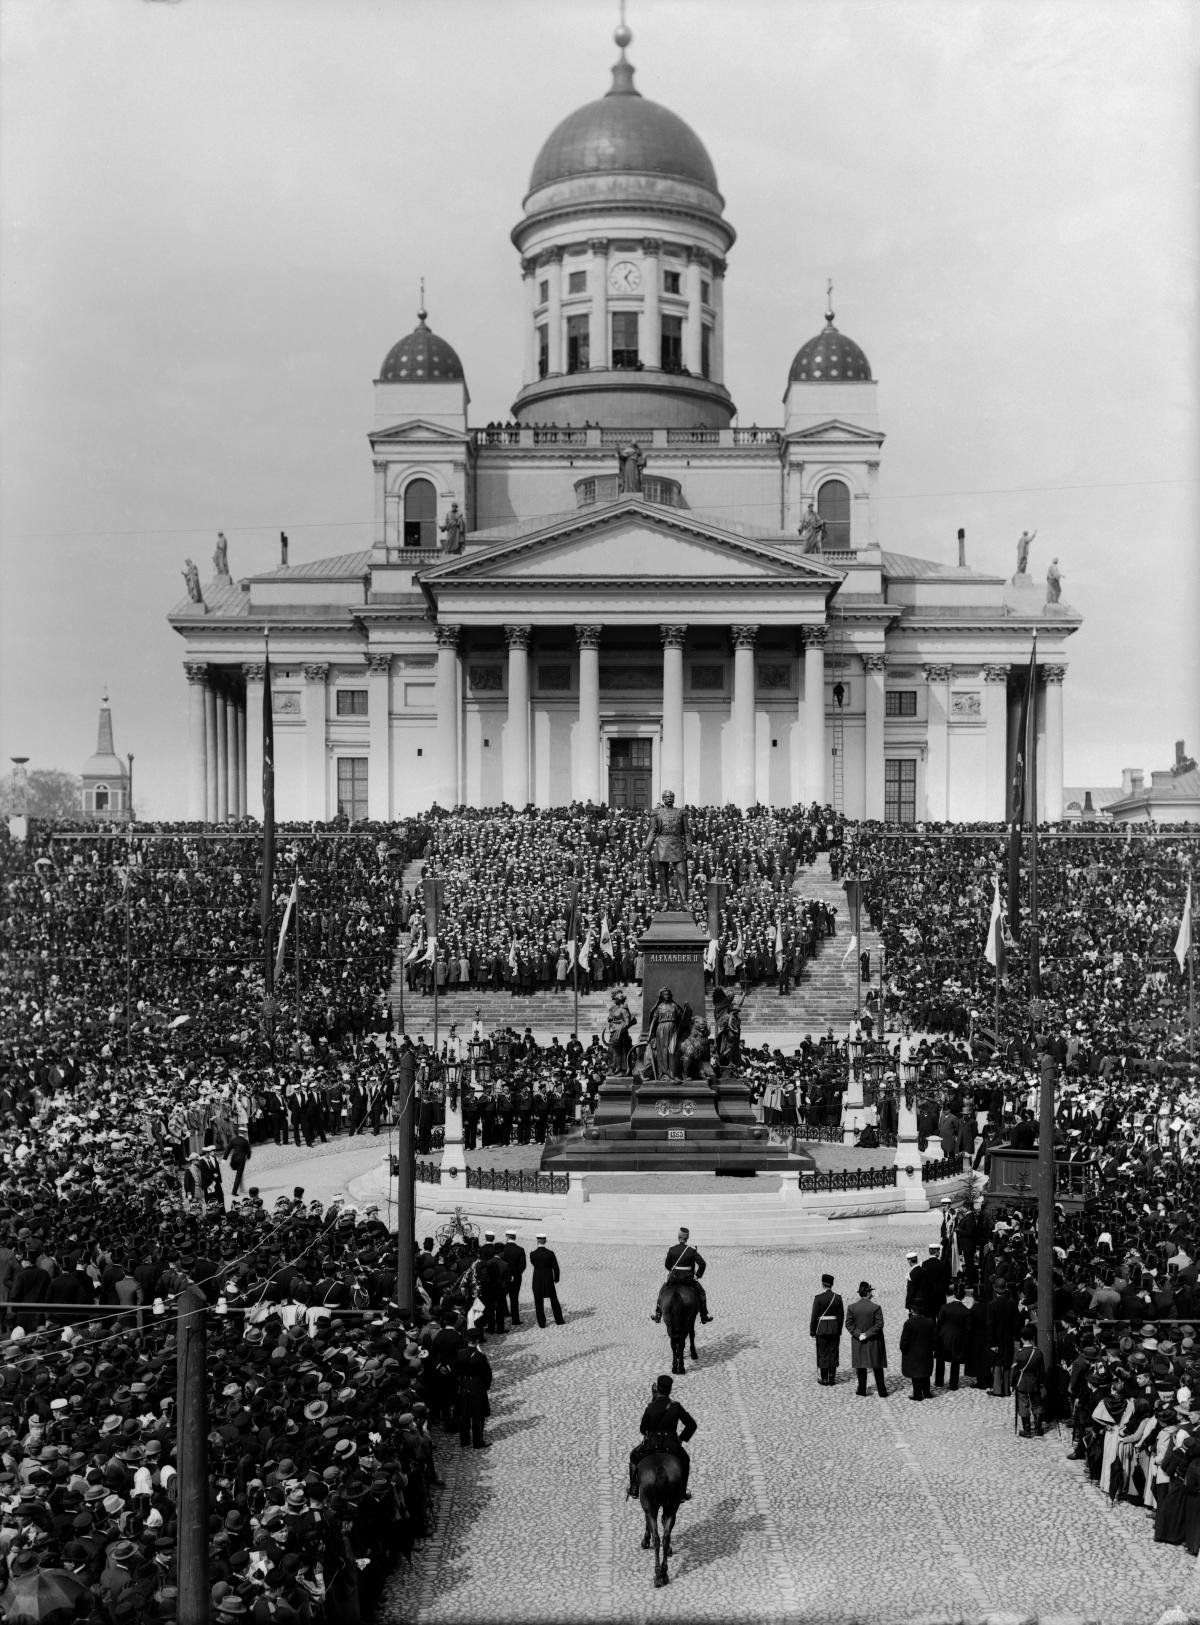 Statue of Alexander II surrounded by a lot of people